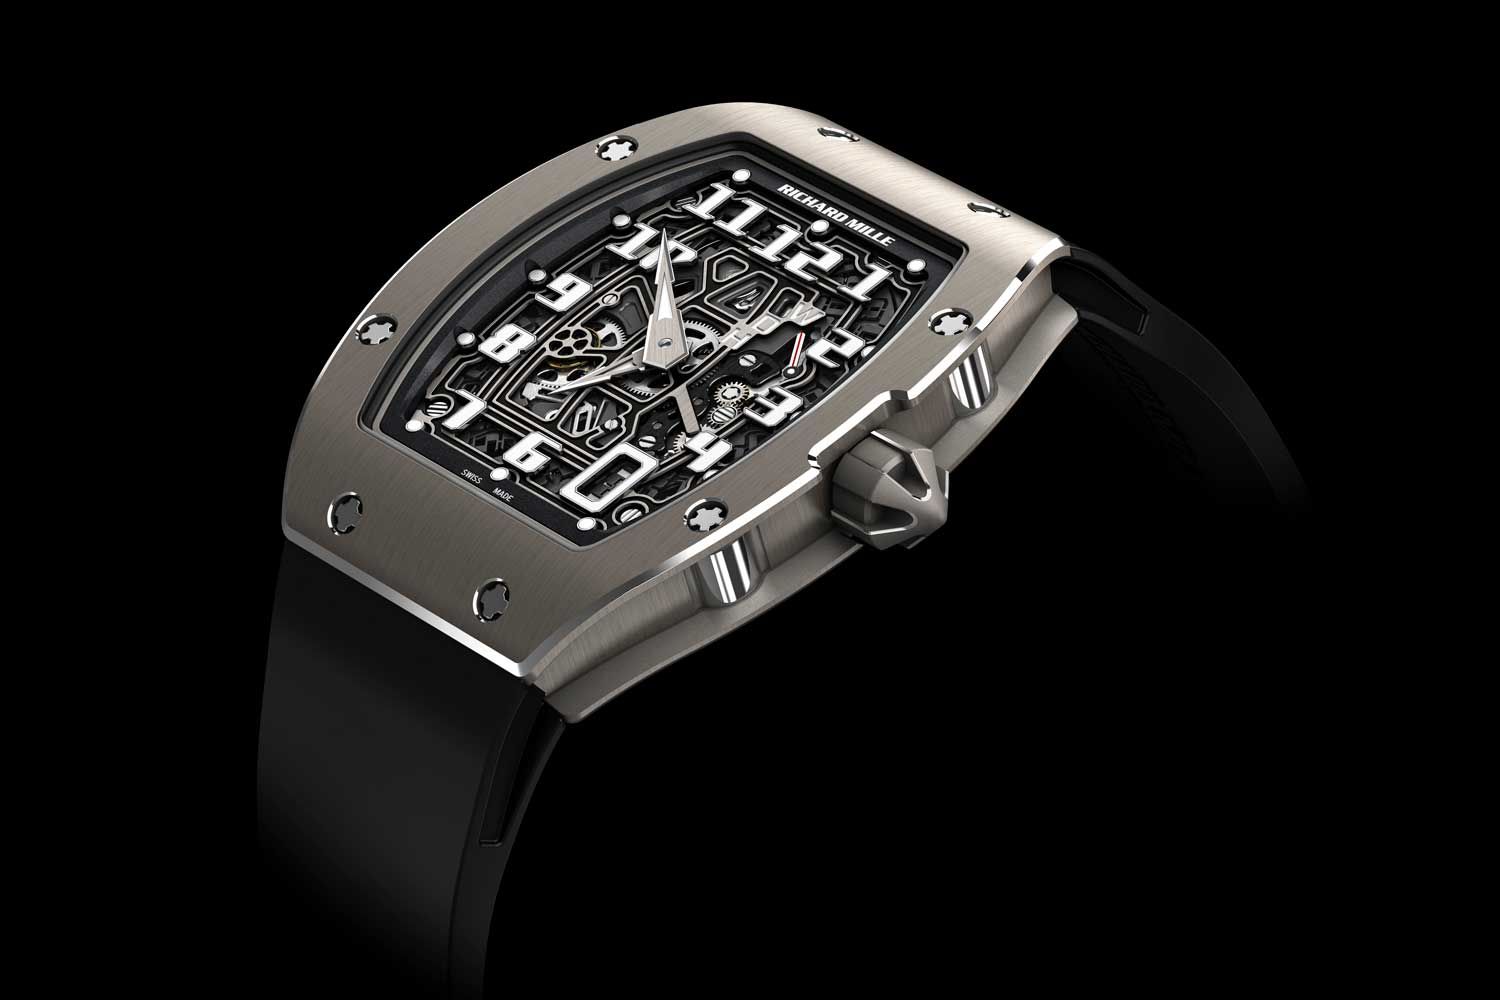 The RM 67-01 was Richard Mille's first extra thin tonneau-shaped watch powered by an all-new, in-house automatic movement, the platinum rotor equipped CRMA6, which measures 3.6mm high; the watch itself is thereafter, 7.75mm high